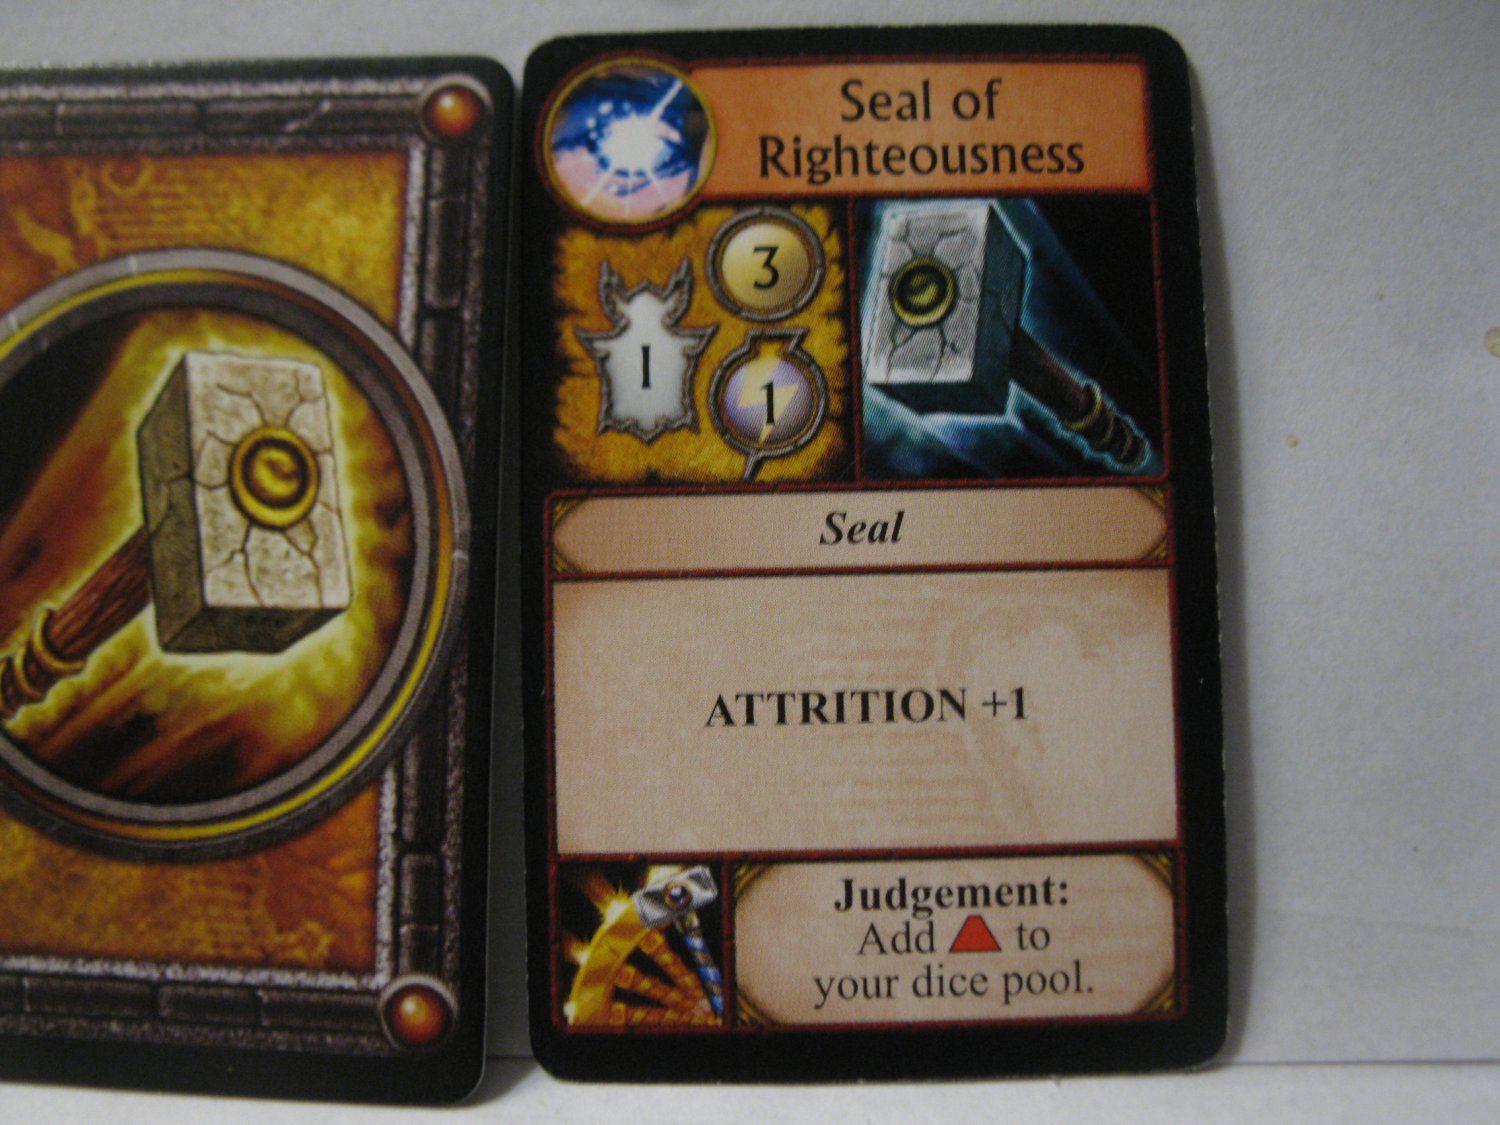 2005 World of Warcraft Board Game piece: Paladin Card - Seal of Righteousness